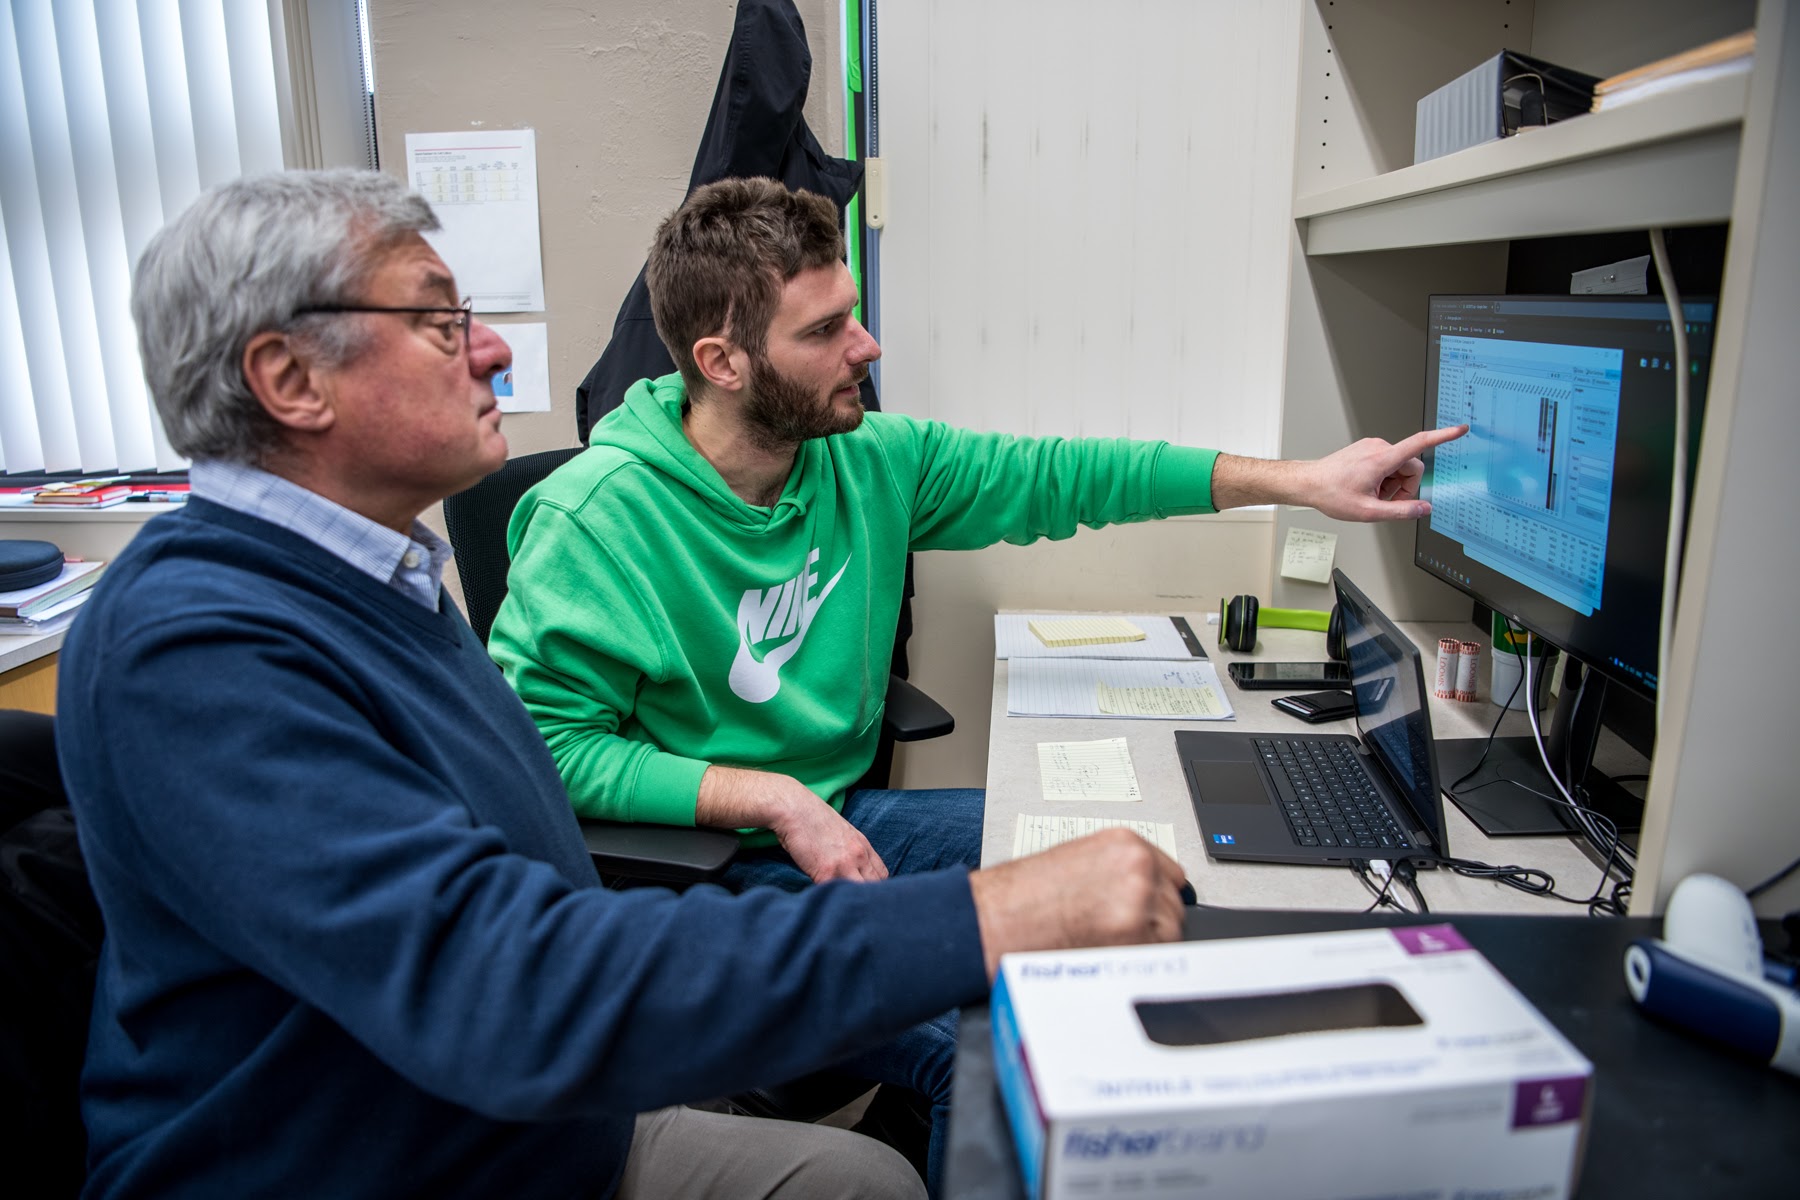 Postdoctoral research associate Alberto Caligiana (right) shows John Sedivy western blot data with results of ORF1 and ORF2 protein expression in senescent compared to young cells.